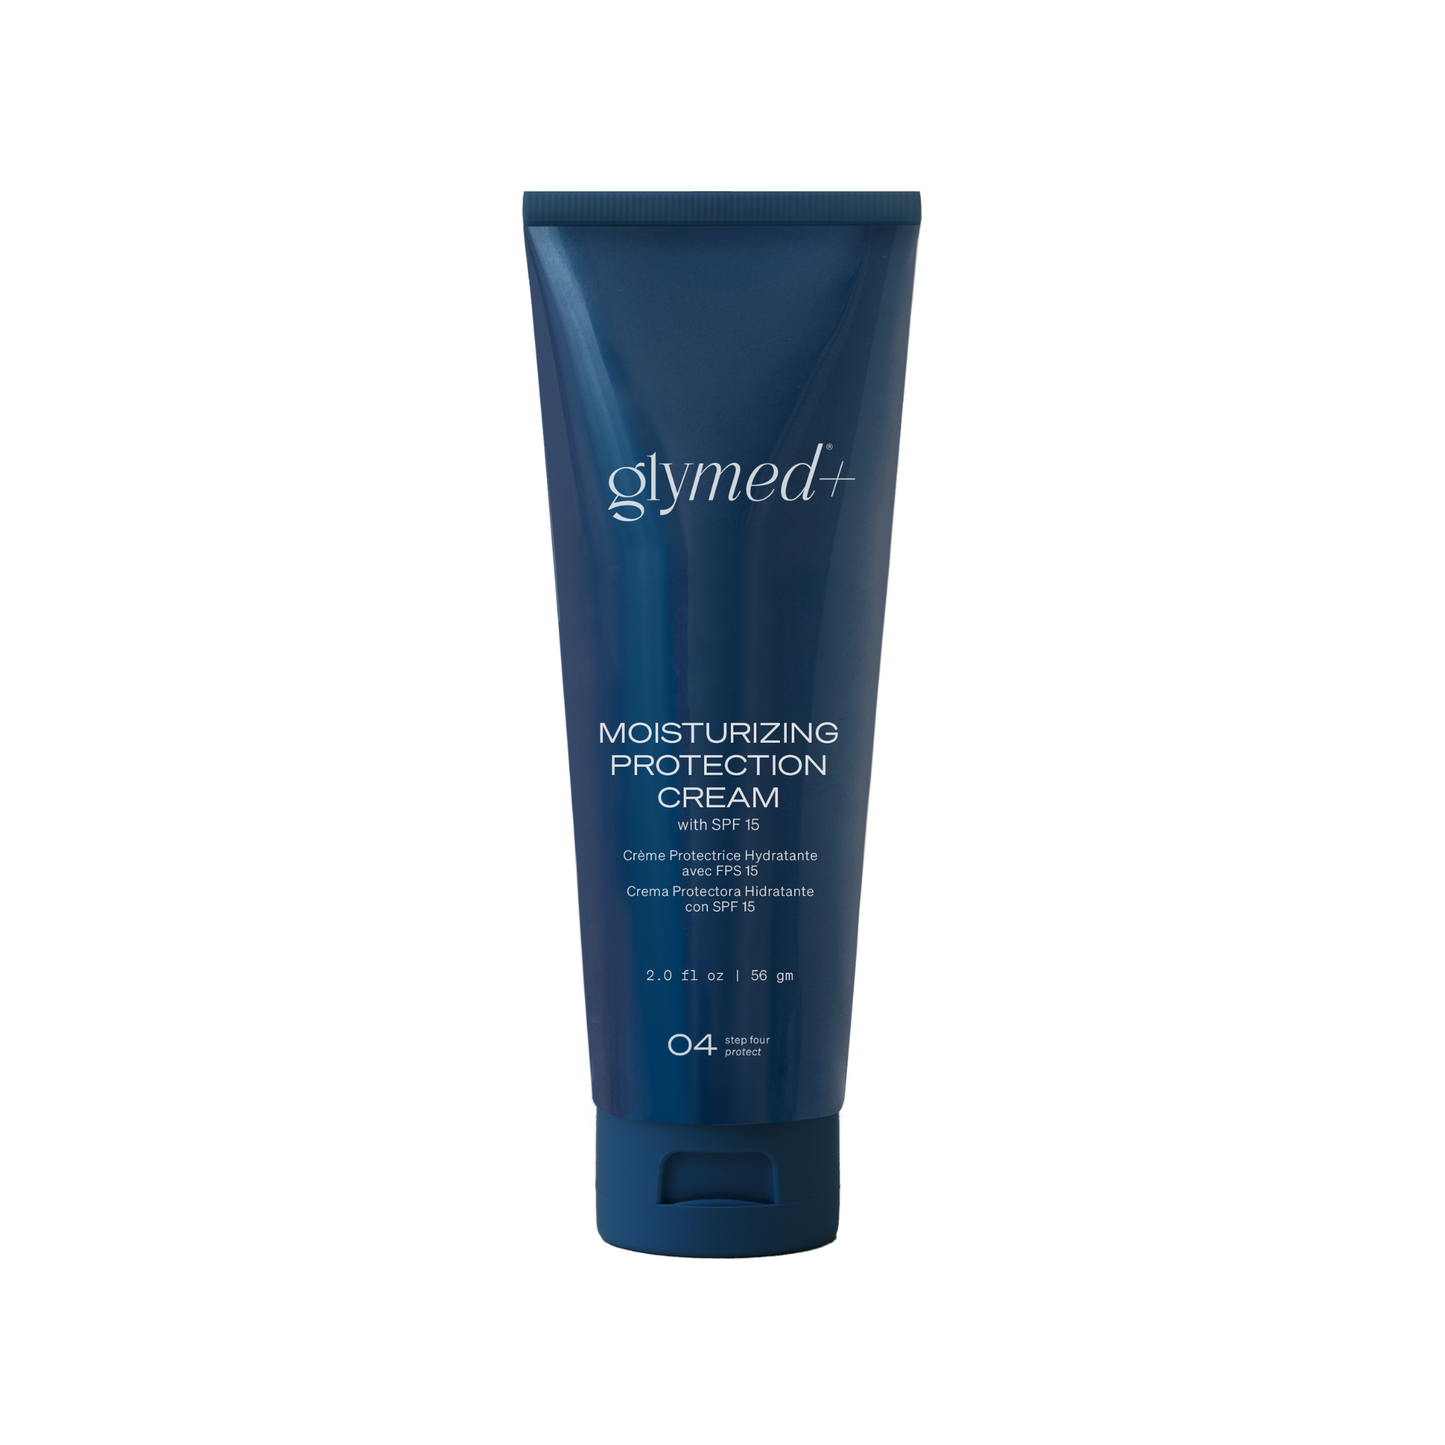 Moisturizing Protection Cream with SPF 15 | Glymed Plus